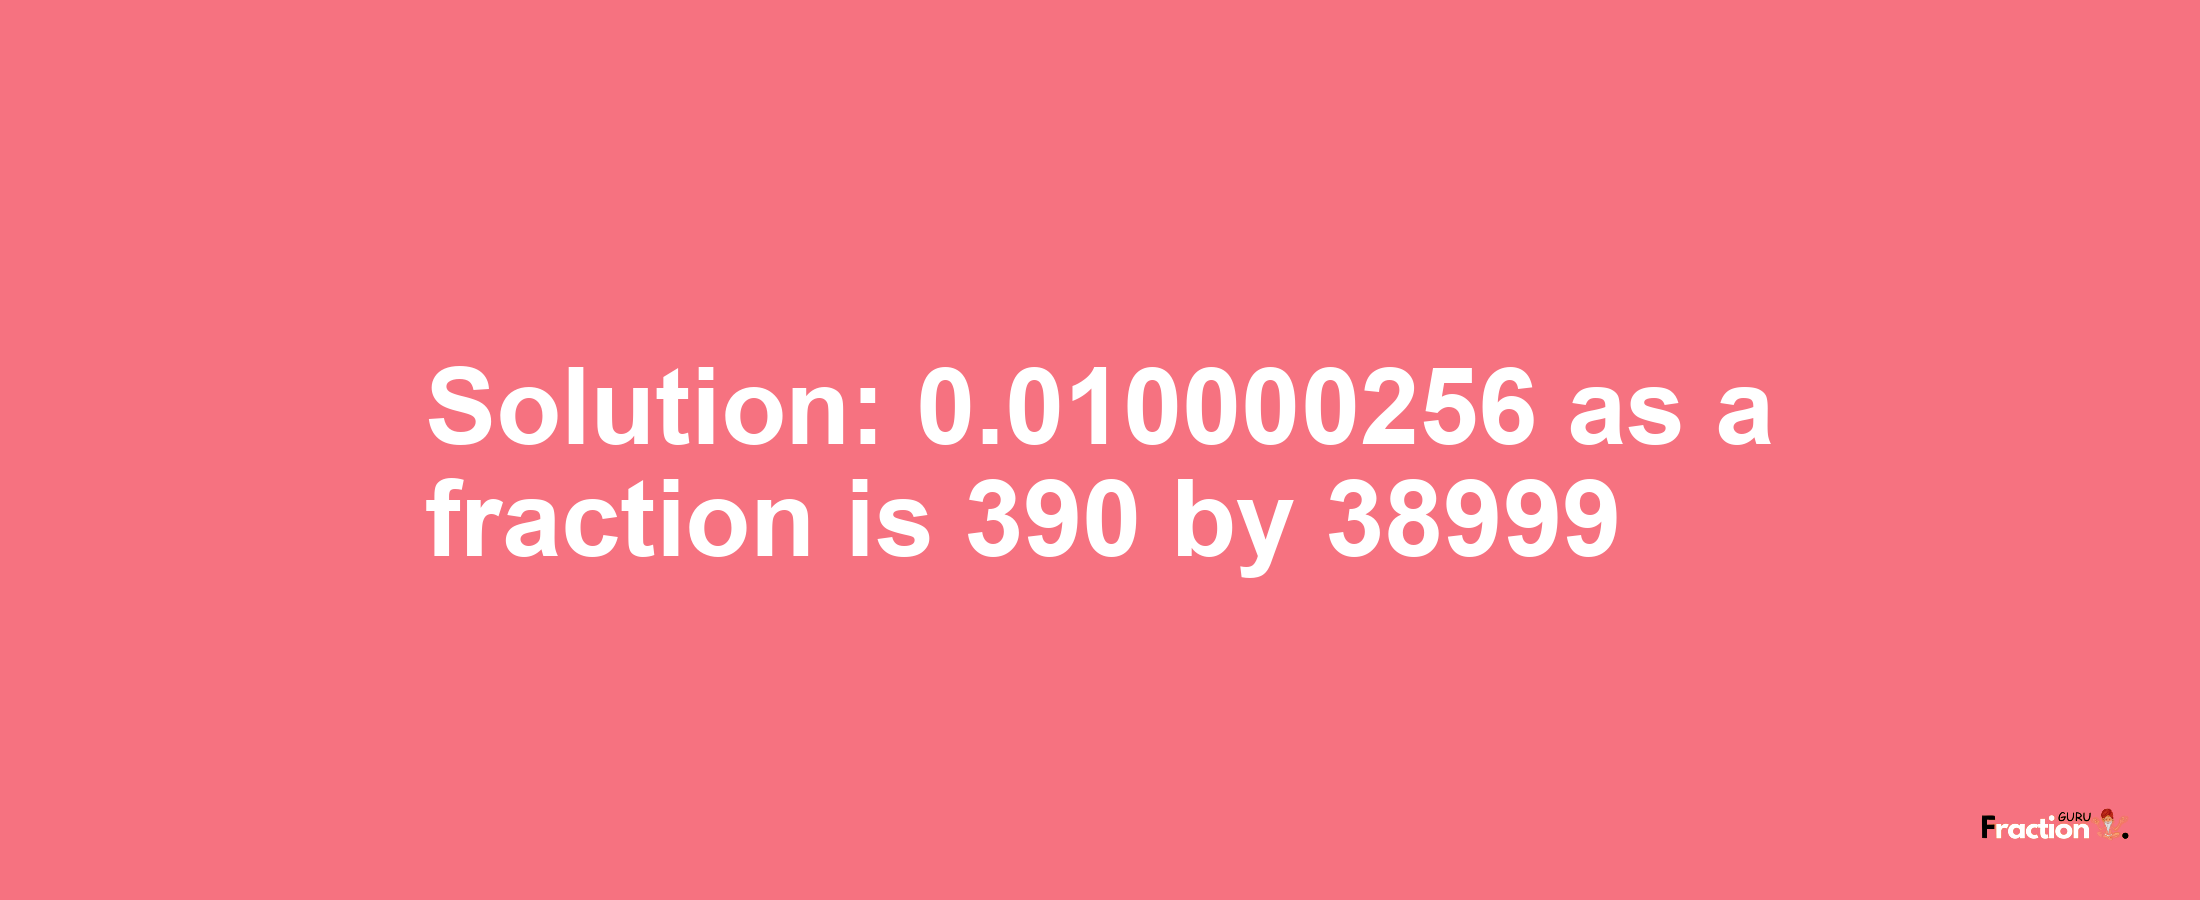 Solution:0.010000256 as a fraction is 390/38999